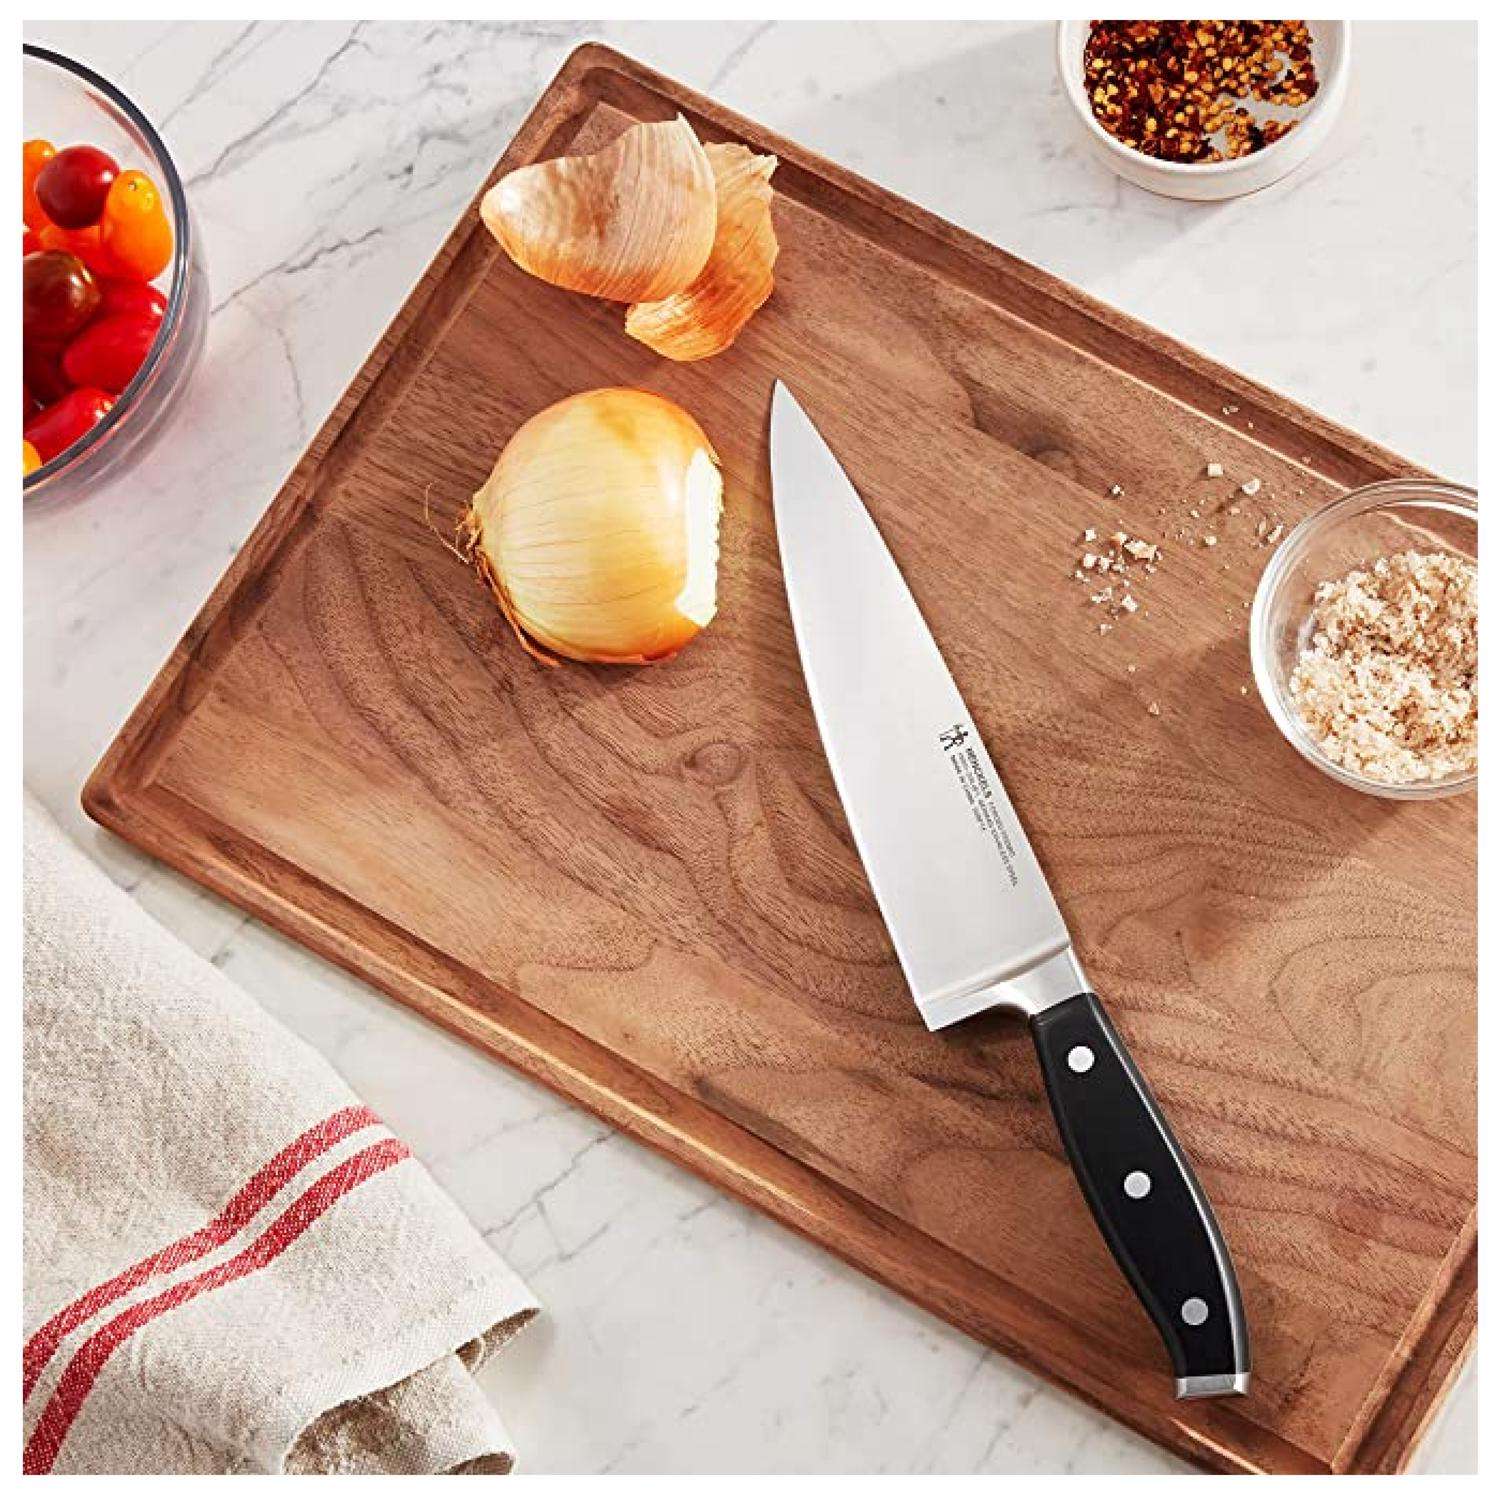 Social Chef Cutting Board Set with Knives- 5 Piece Kitchen Essentials and Accessories Set with 2 Cutting Boards, Kitchen Shears, A Knife and Blade